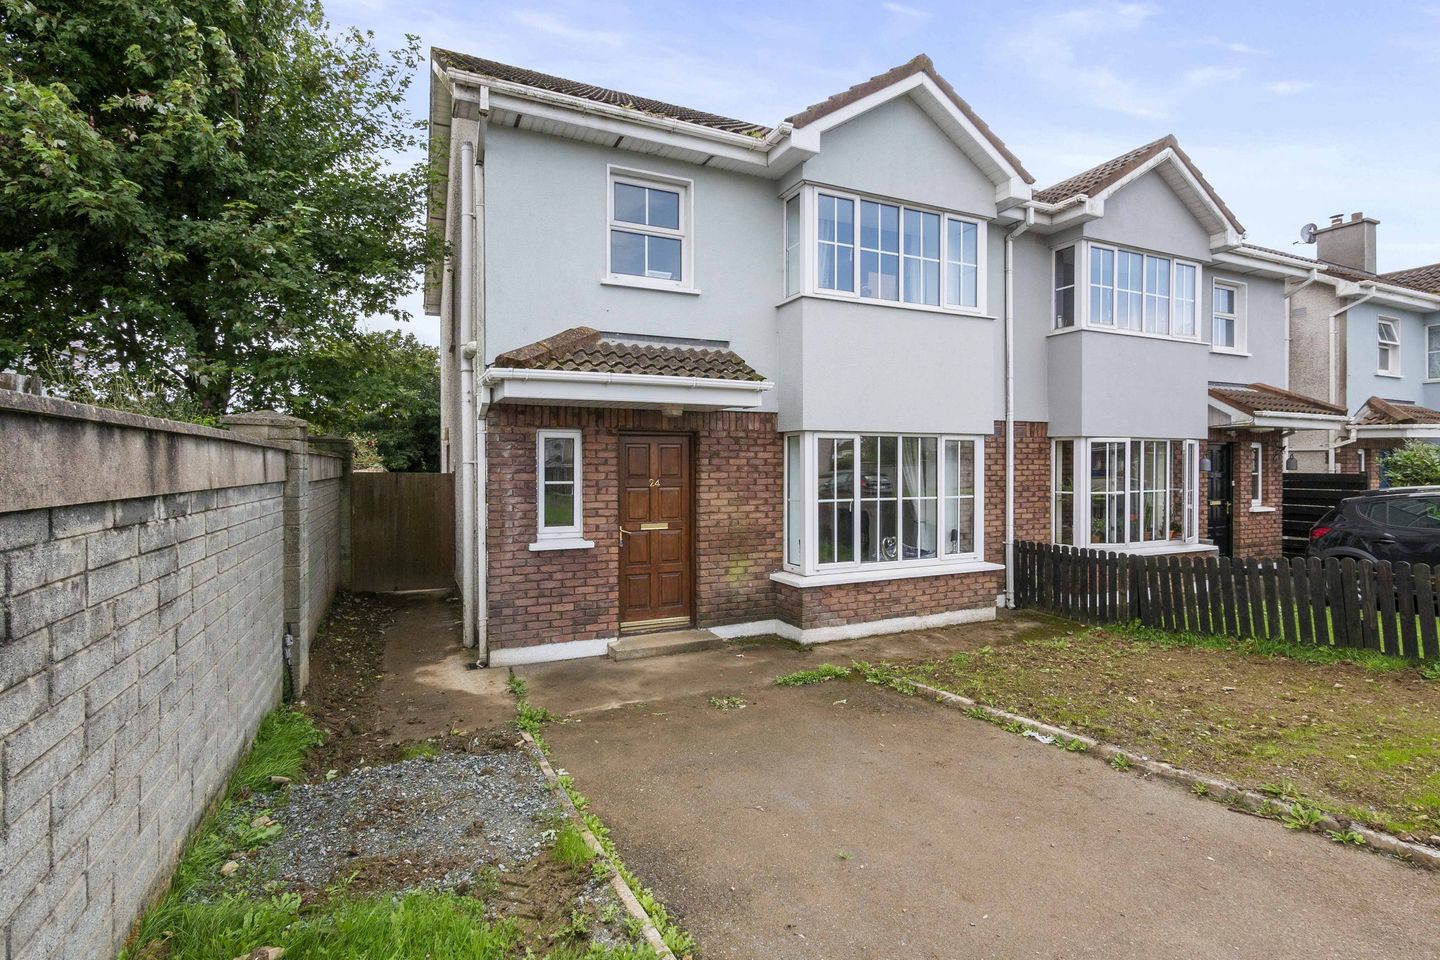 24 Stephen's Court, New Ross, Co. Wexford, Y34PY61